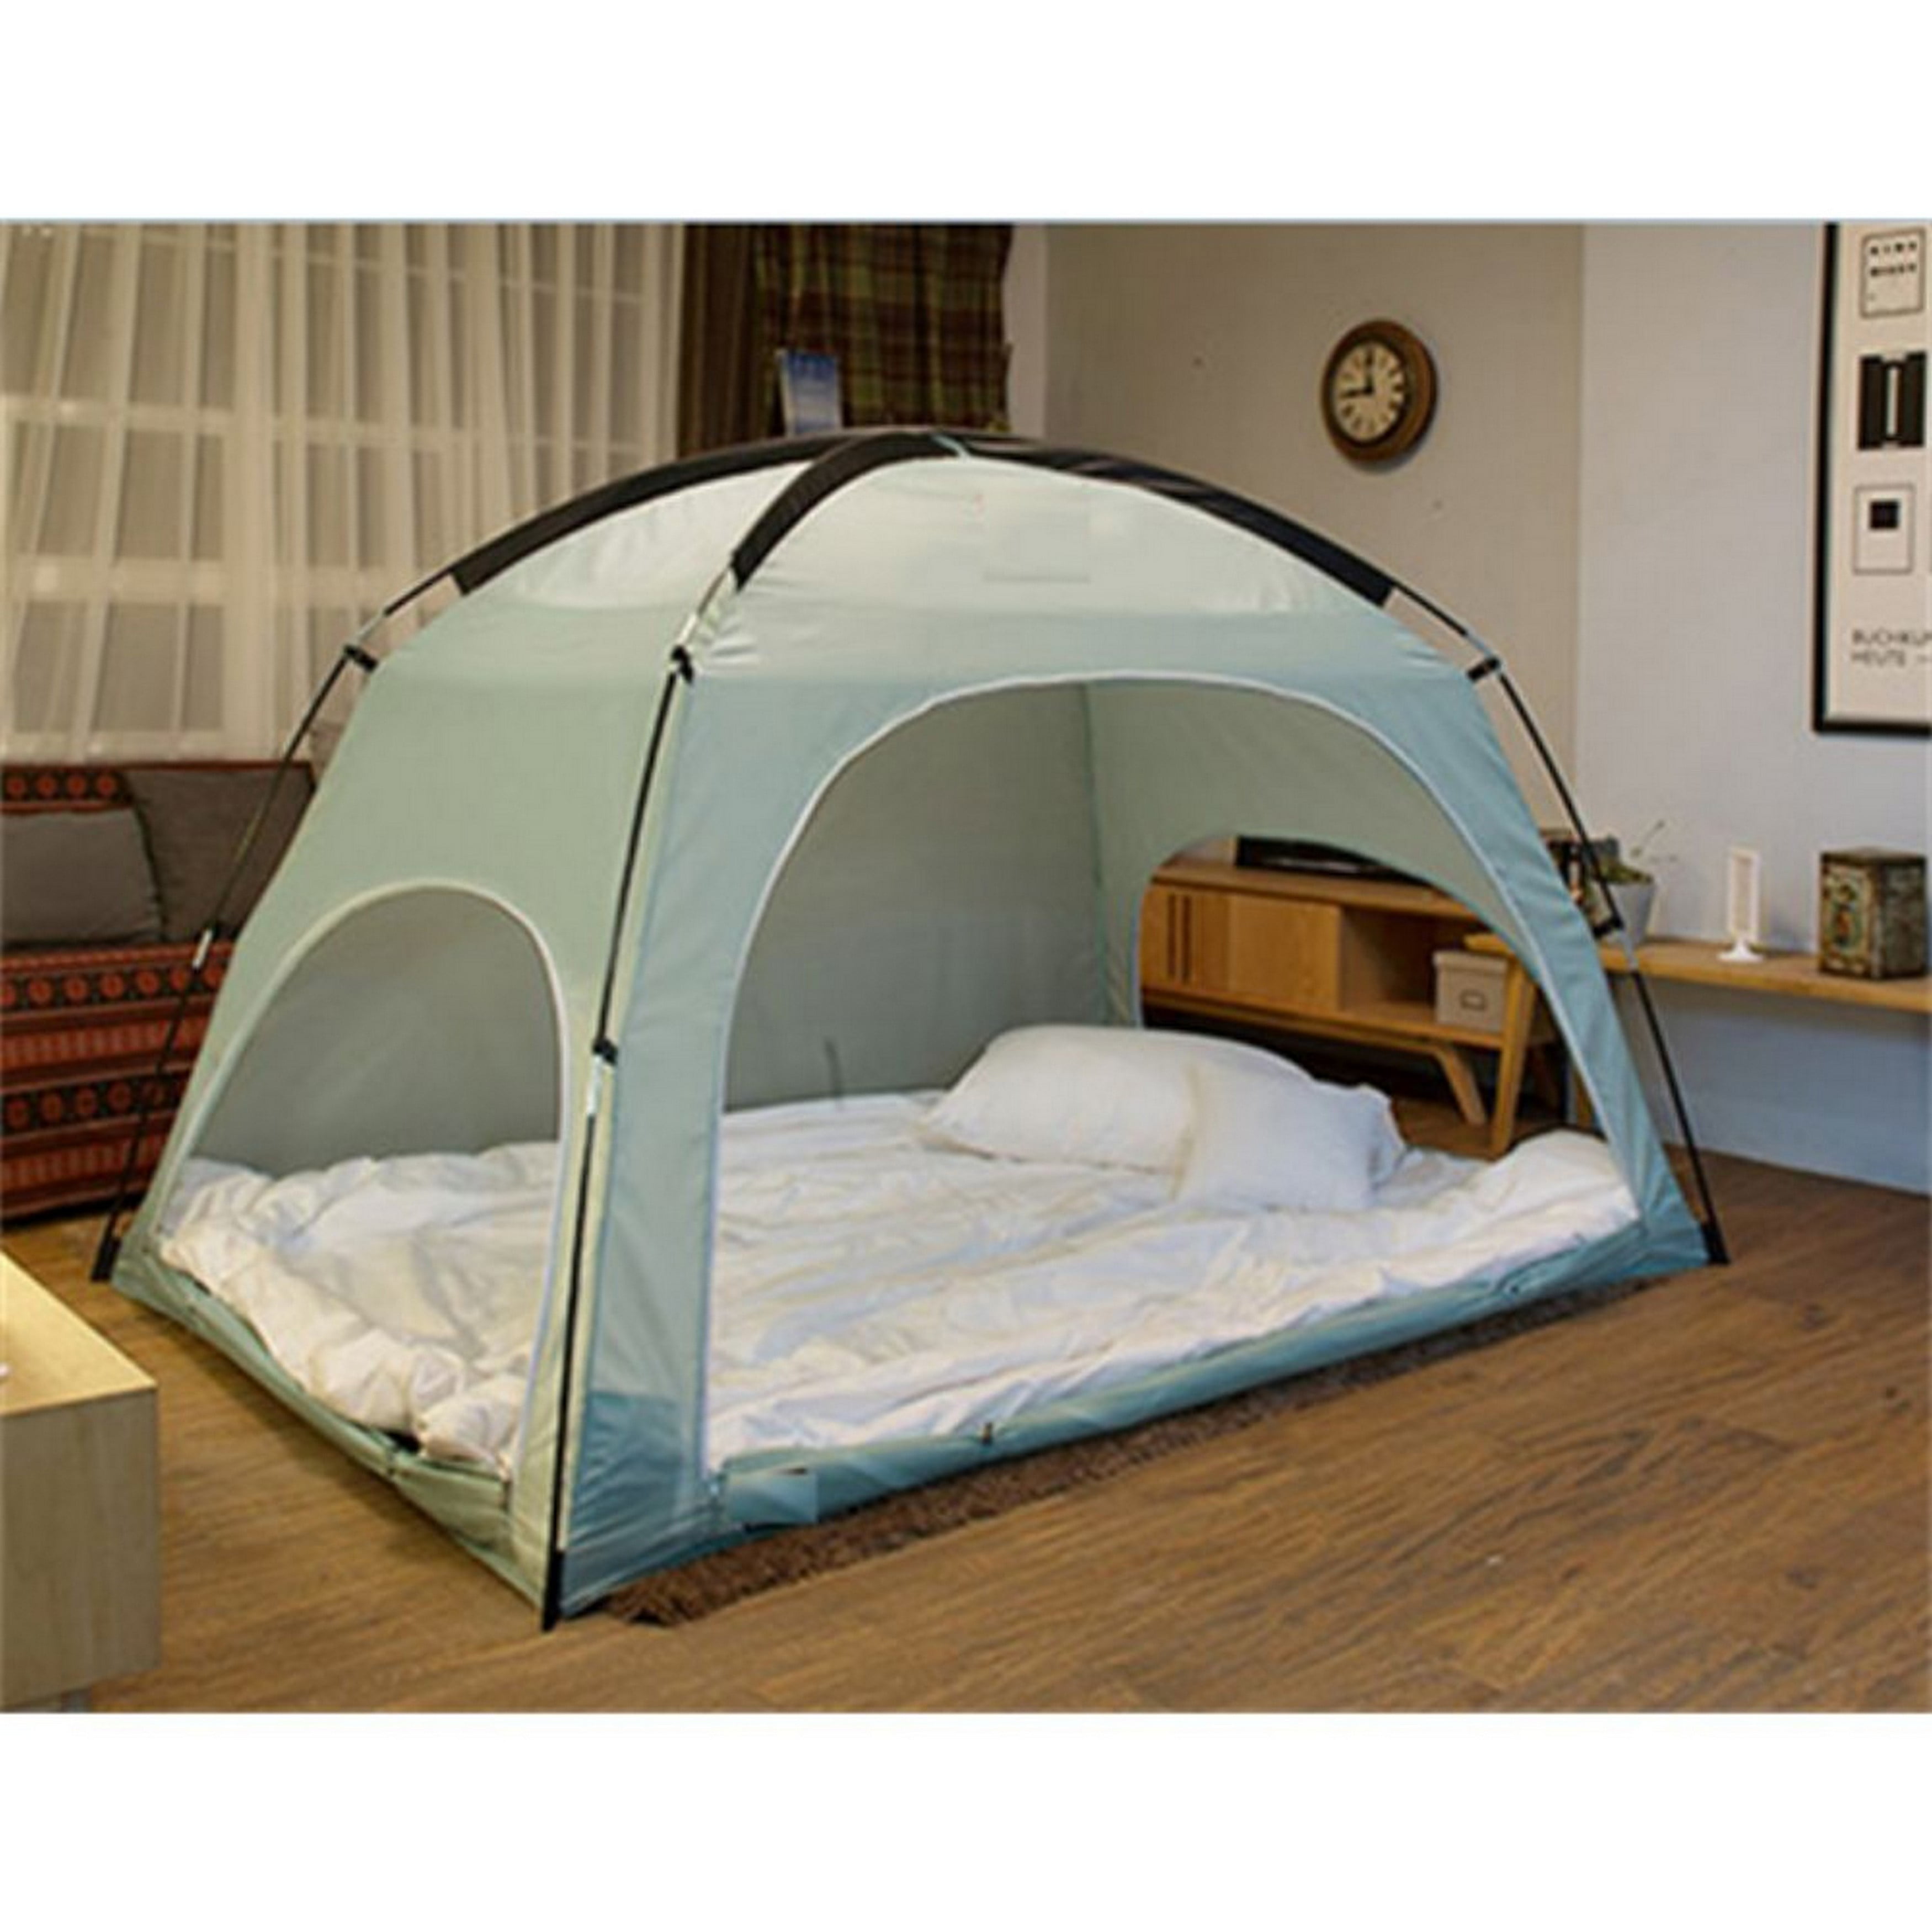 E-Joy Living Bed Canopy Privacy Tents Bed Tent Shelter ...